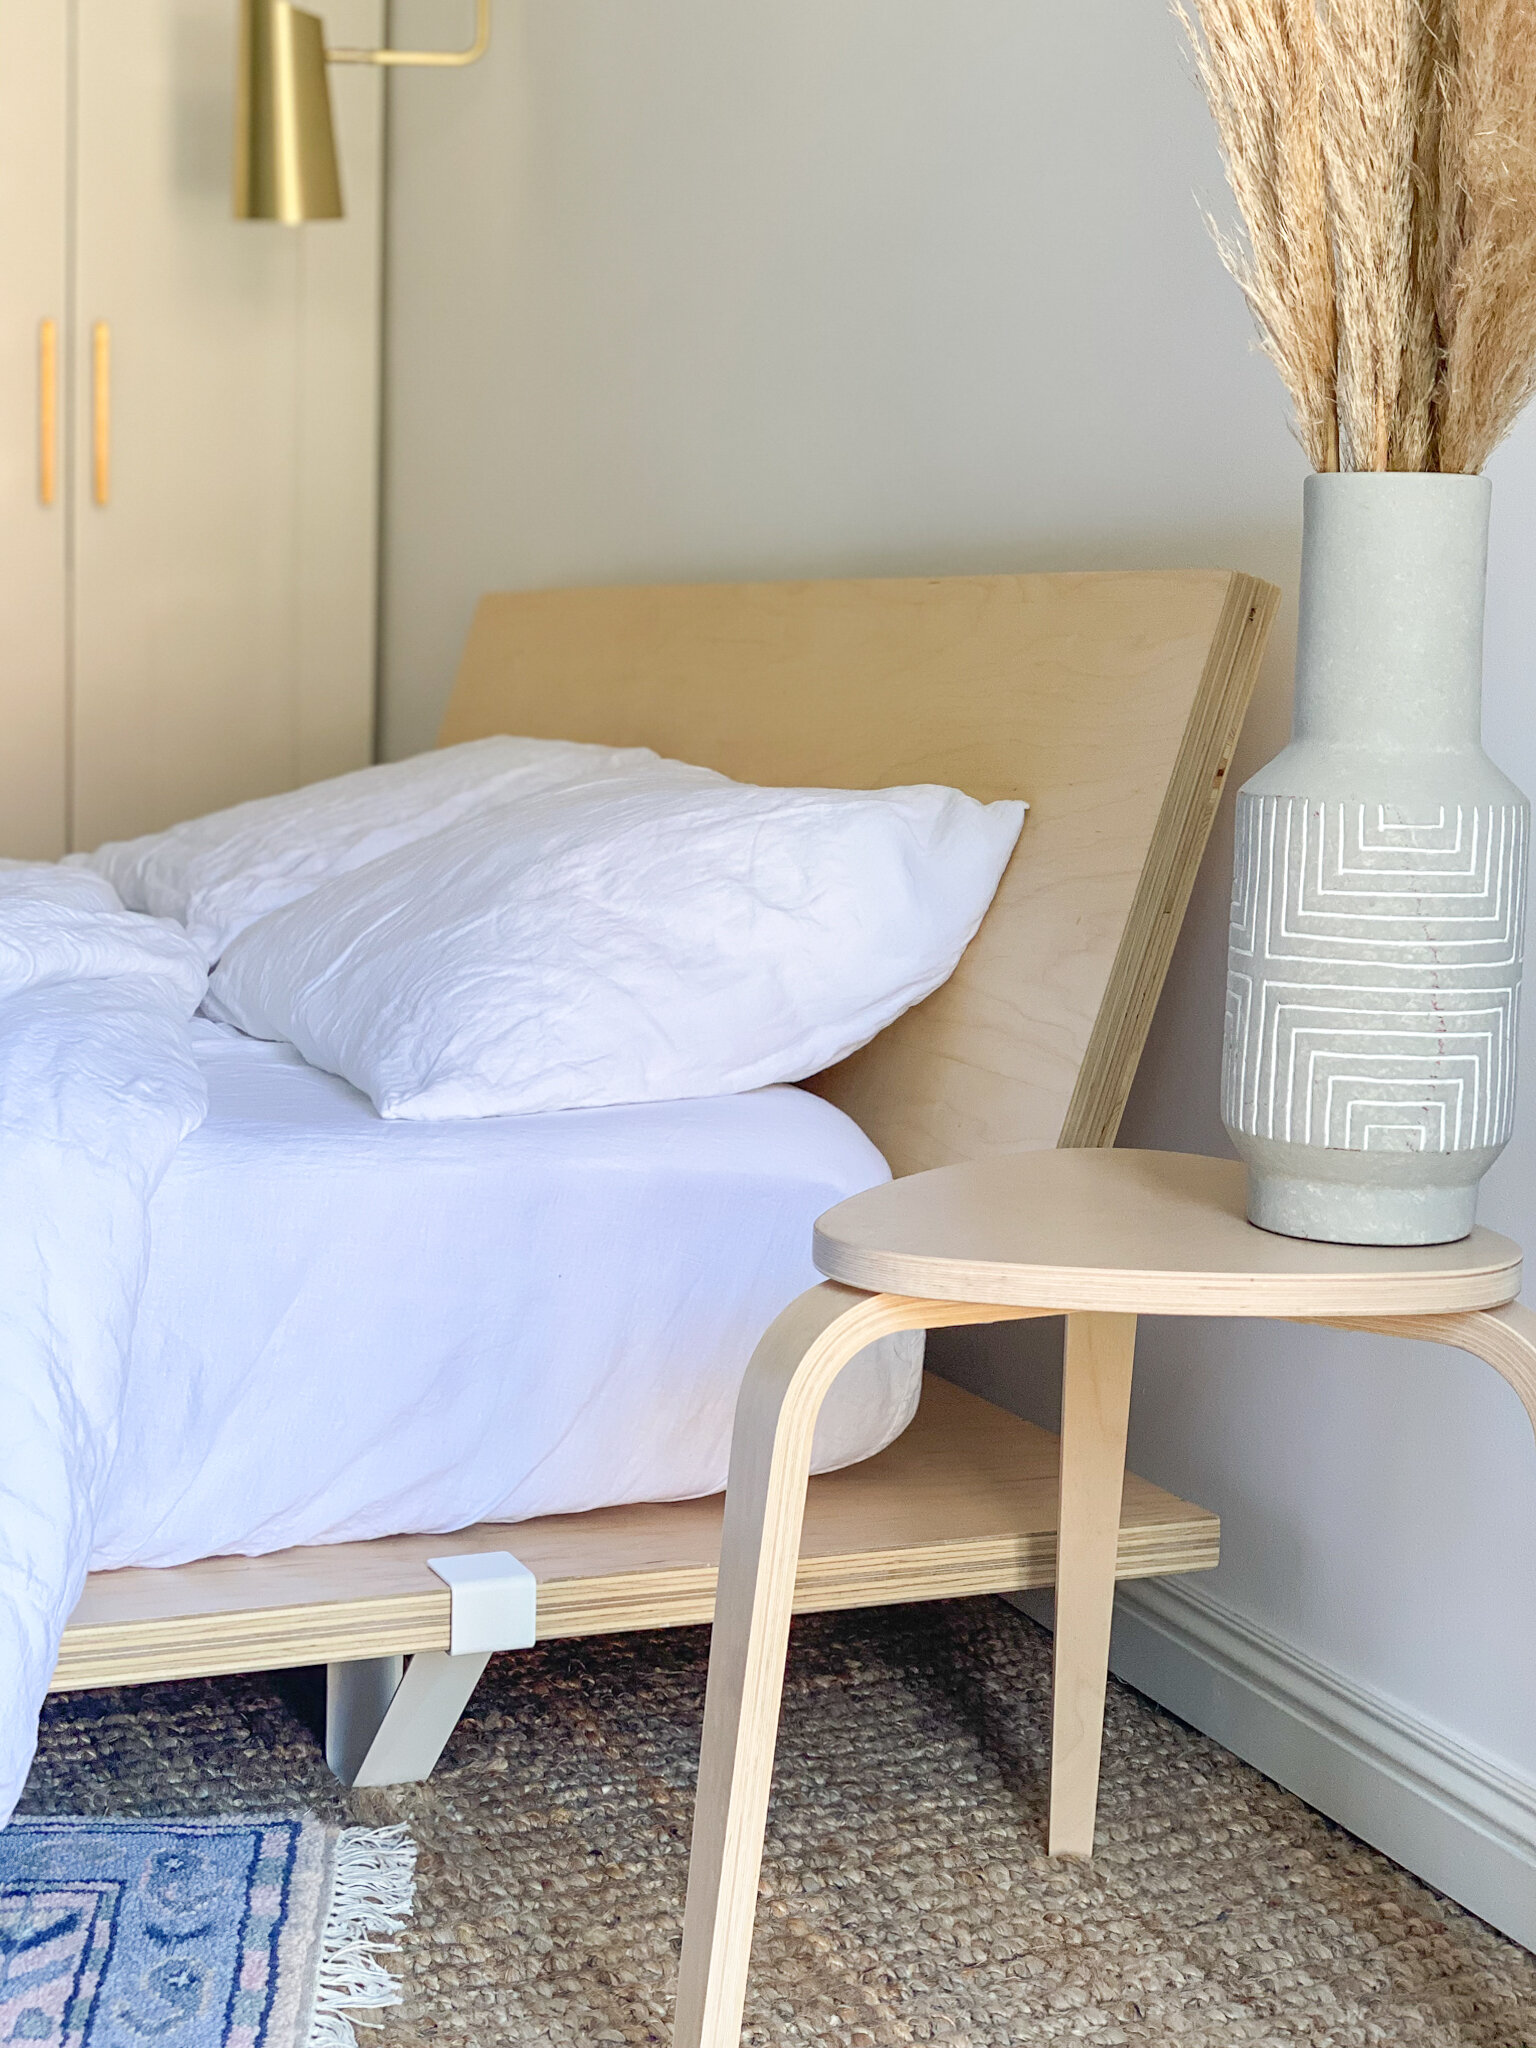 The Best Little Nightstands for Small Spaces